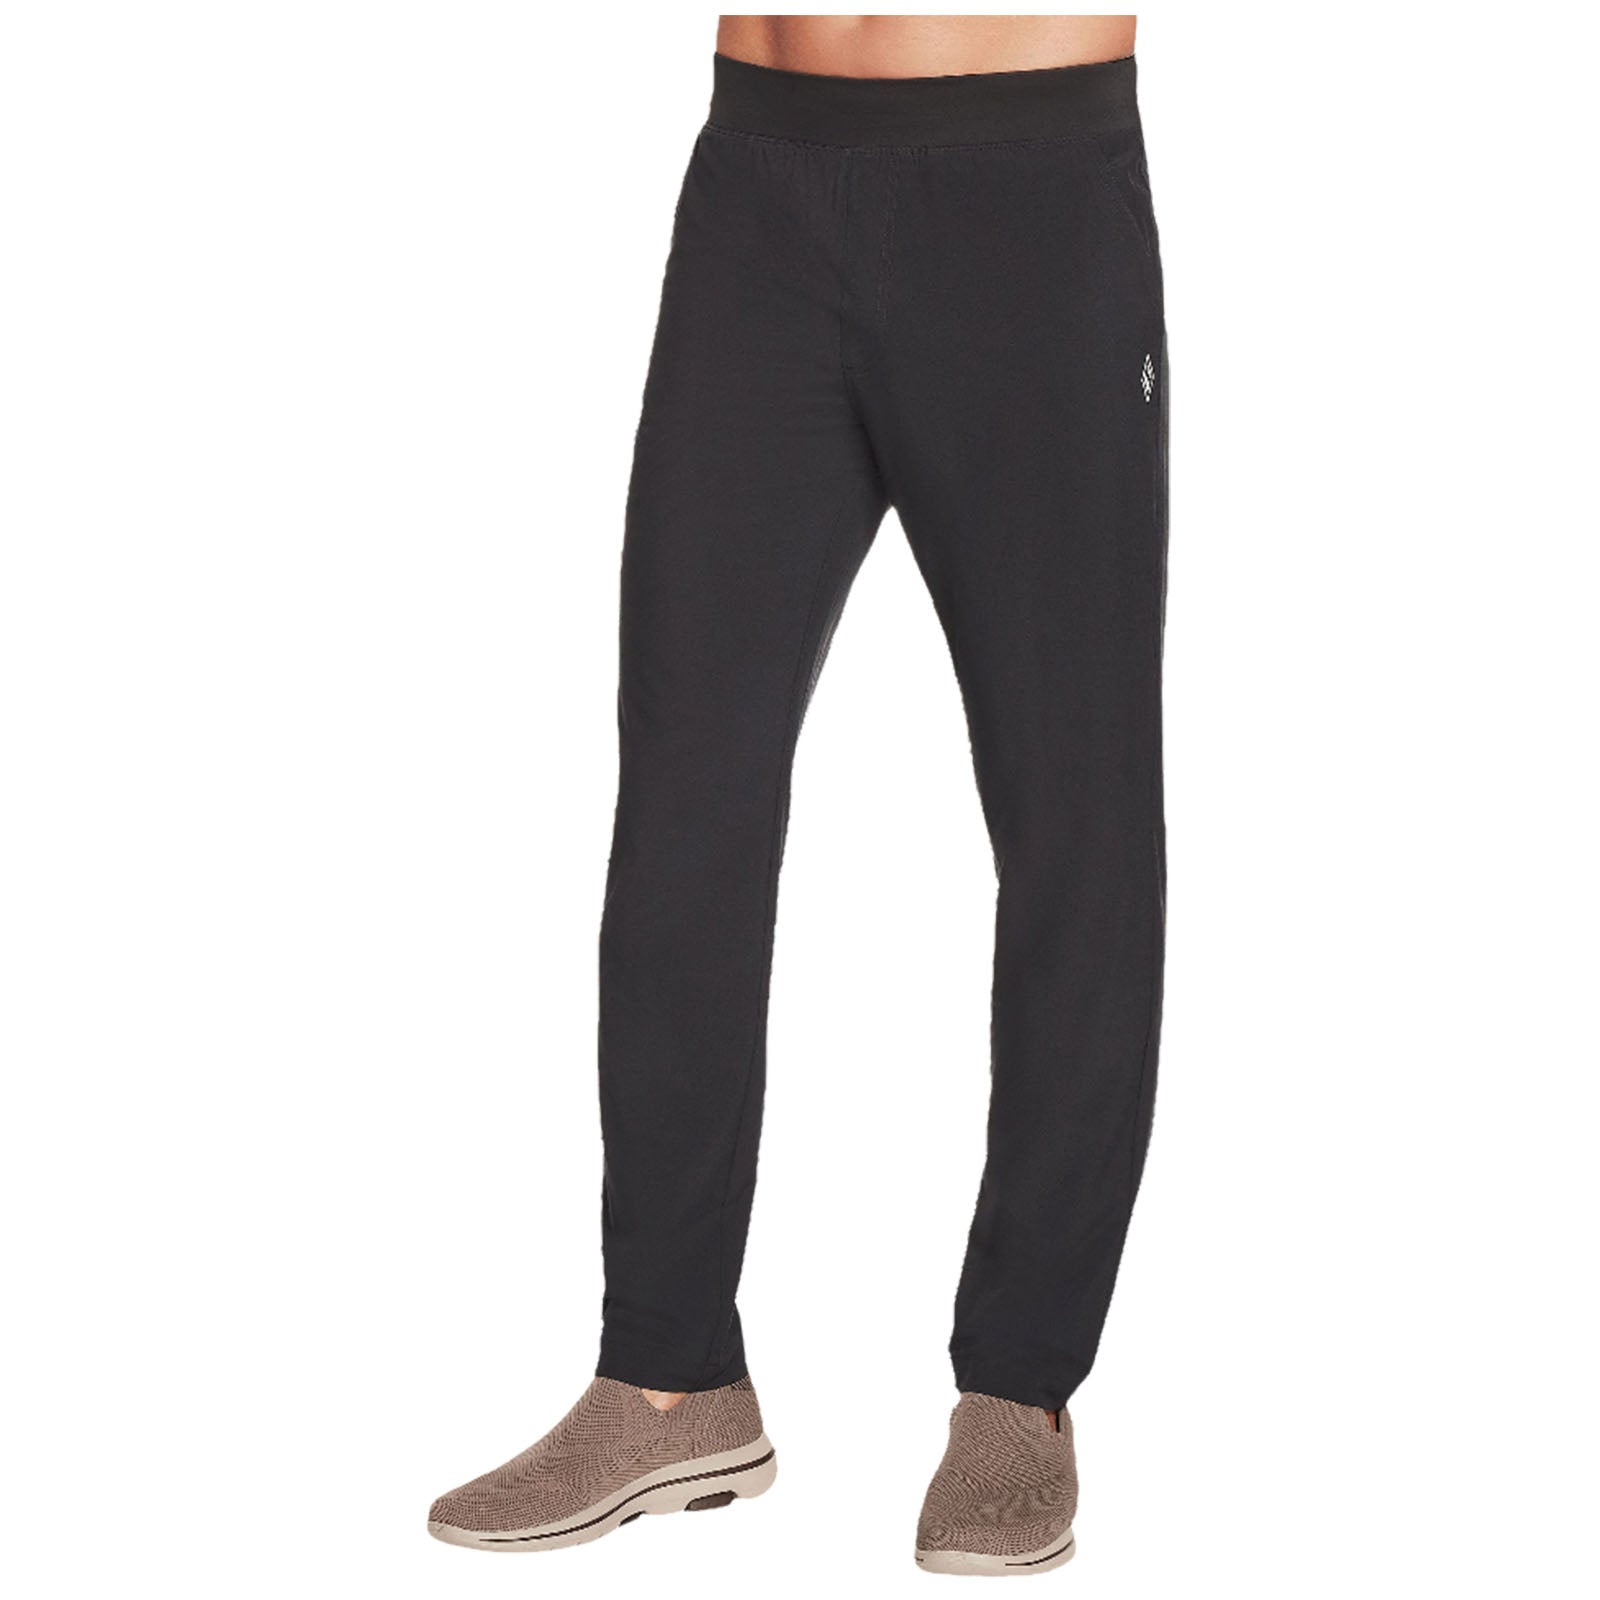 Skechers Mens Action Trousers